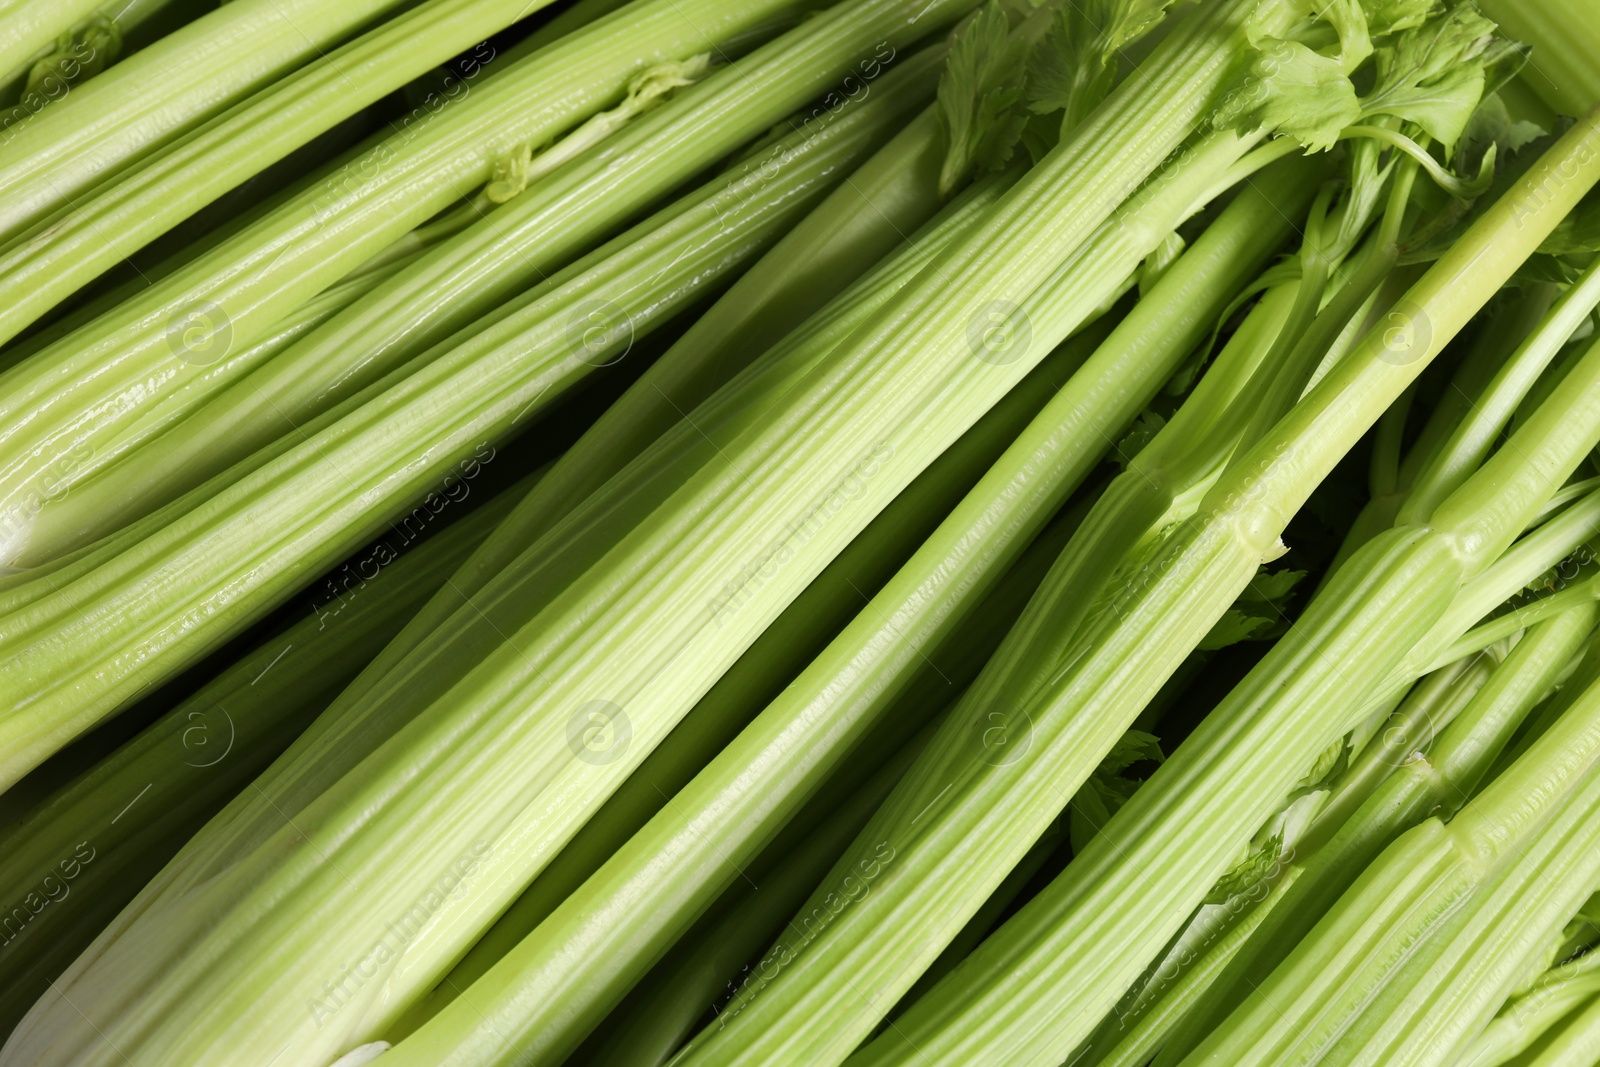 Photo of Many fresh green celery bunches as background, closeup